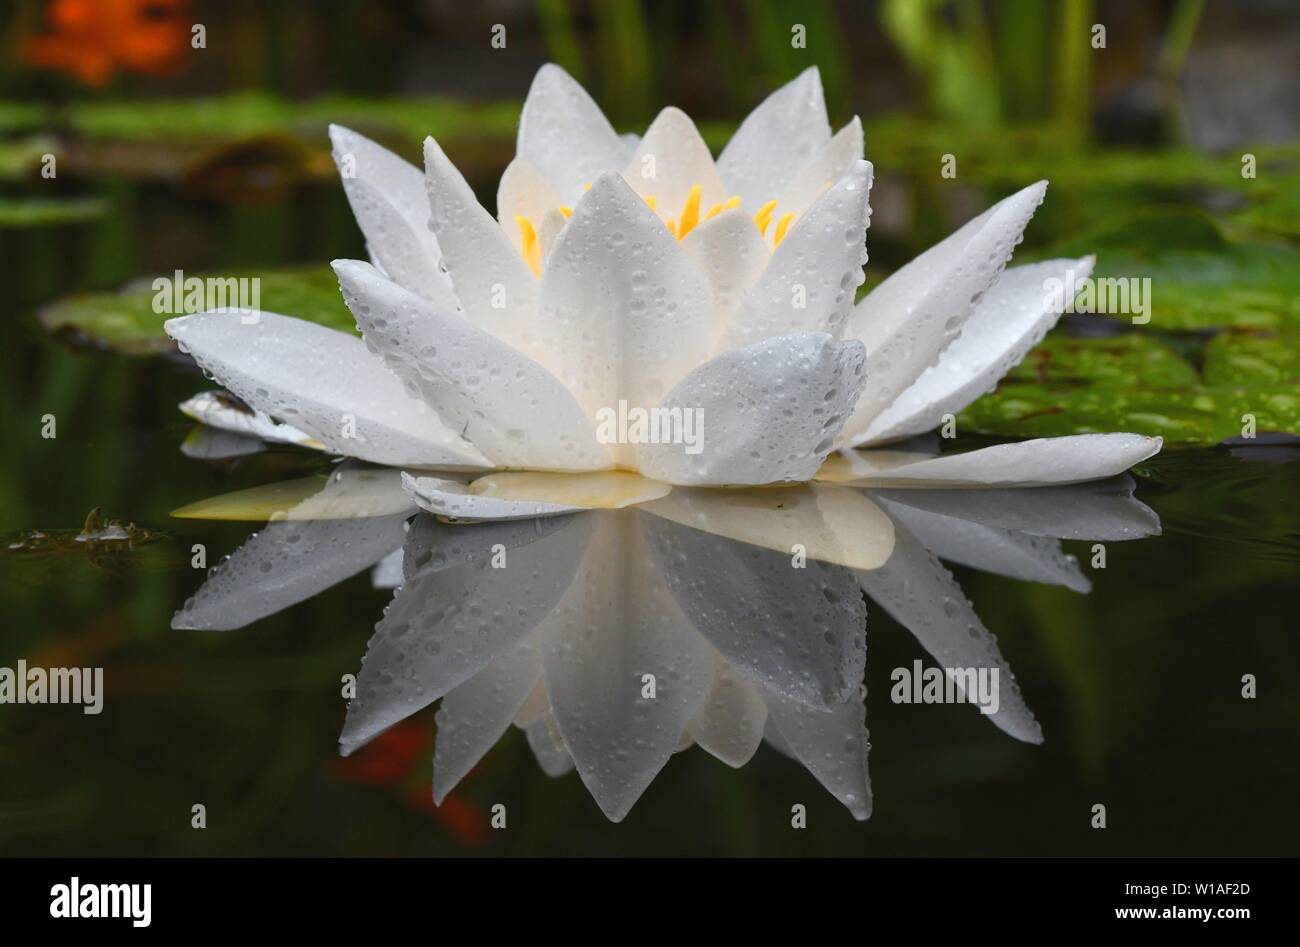 Waterlily with fresh raindrops on its leaves, reflecting in water Stock Photo